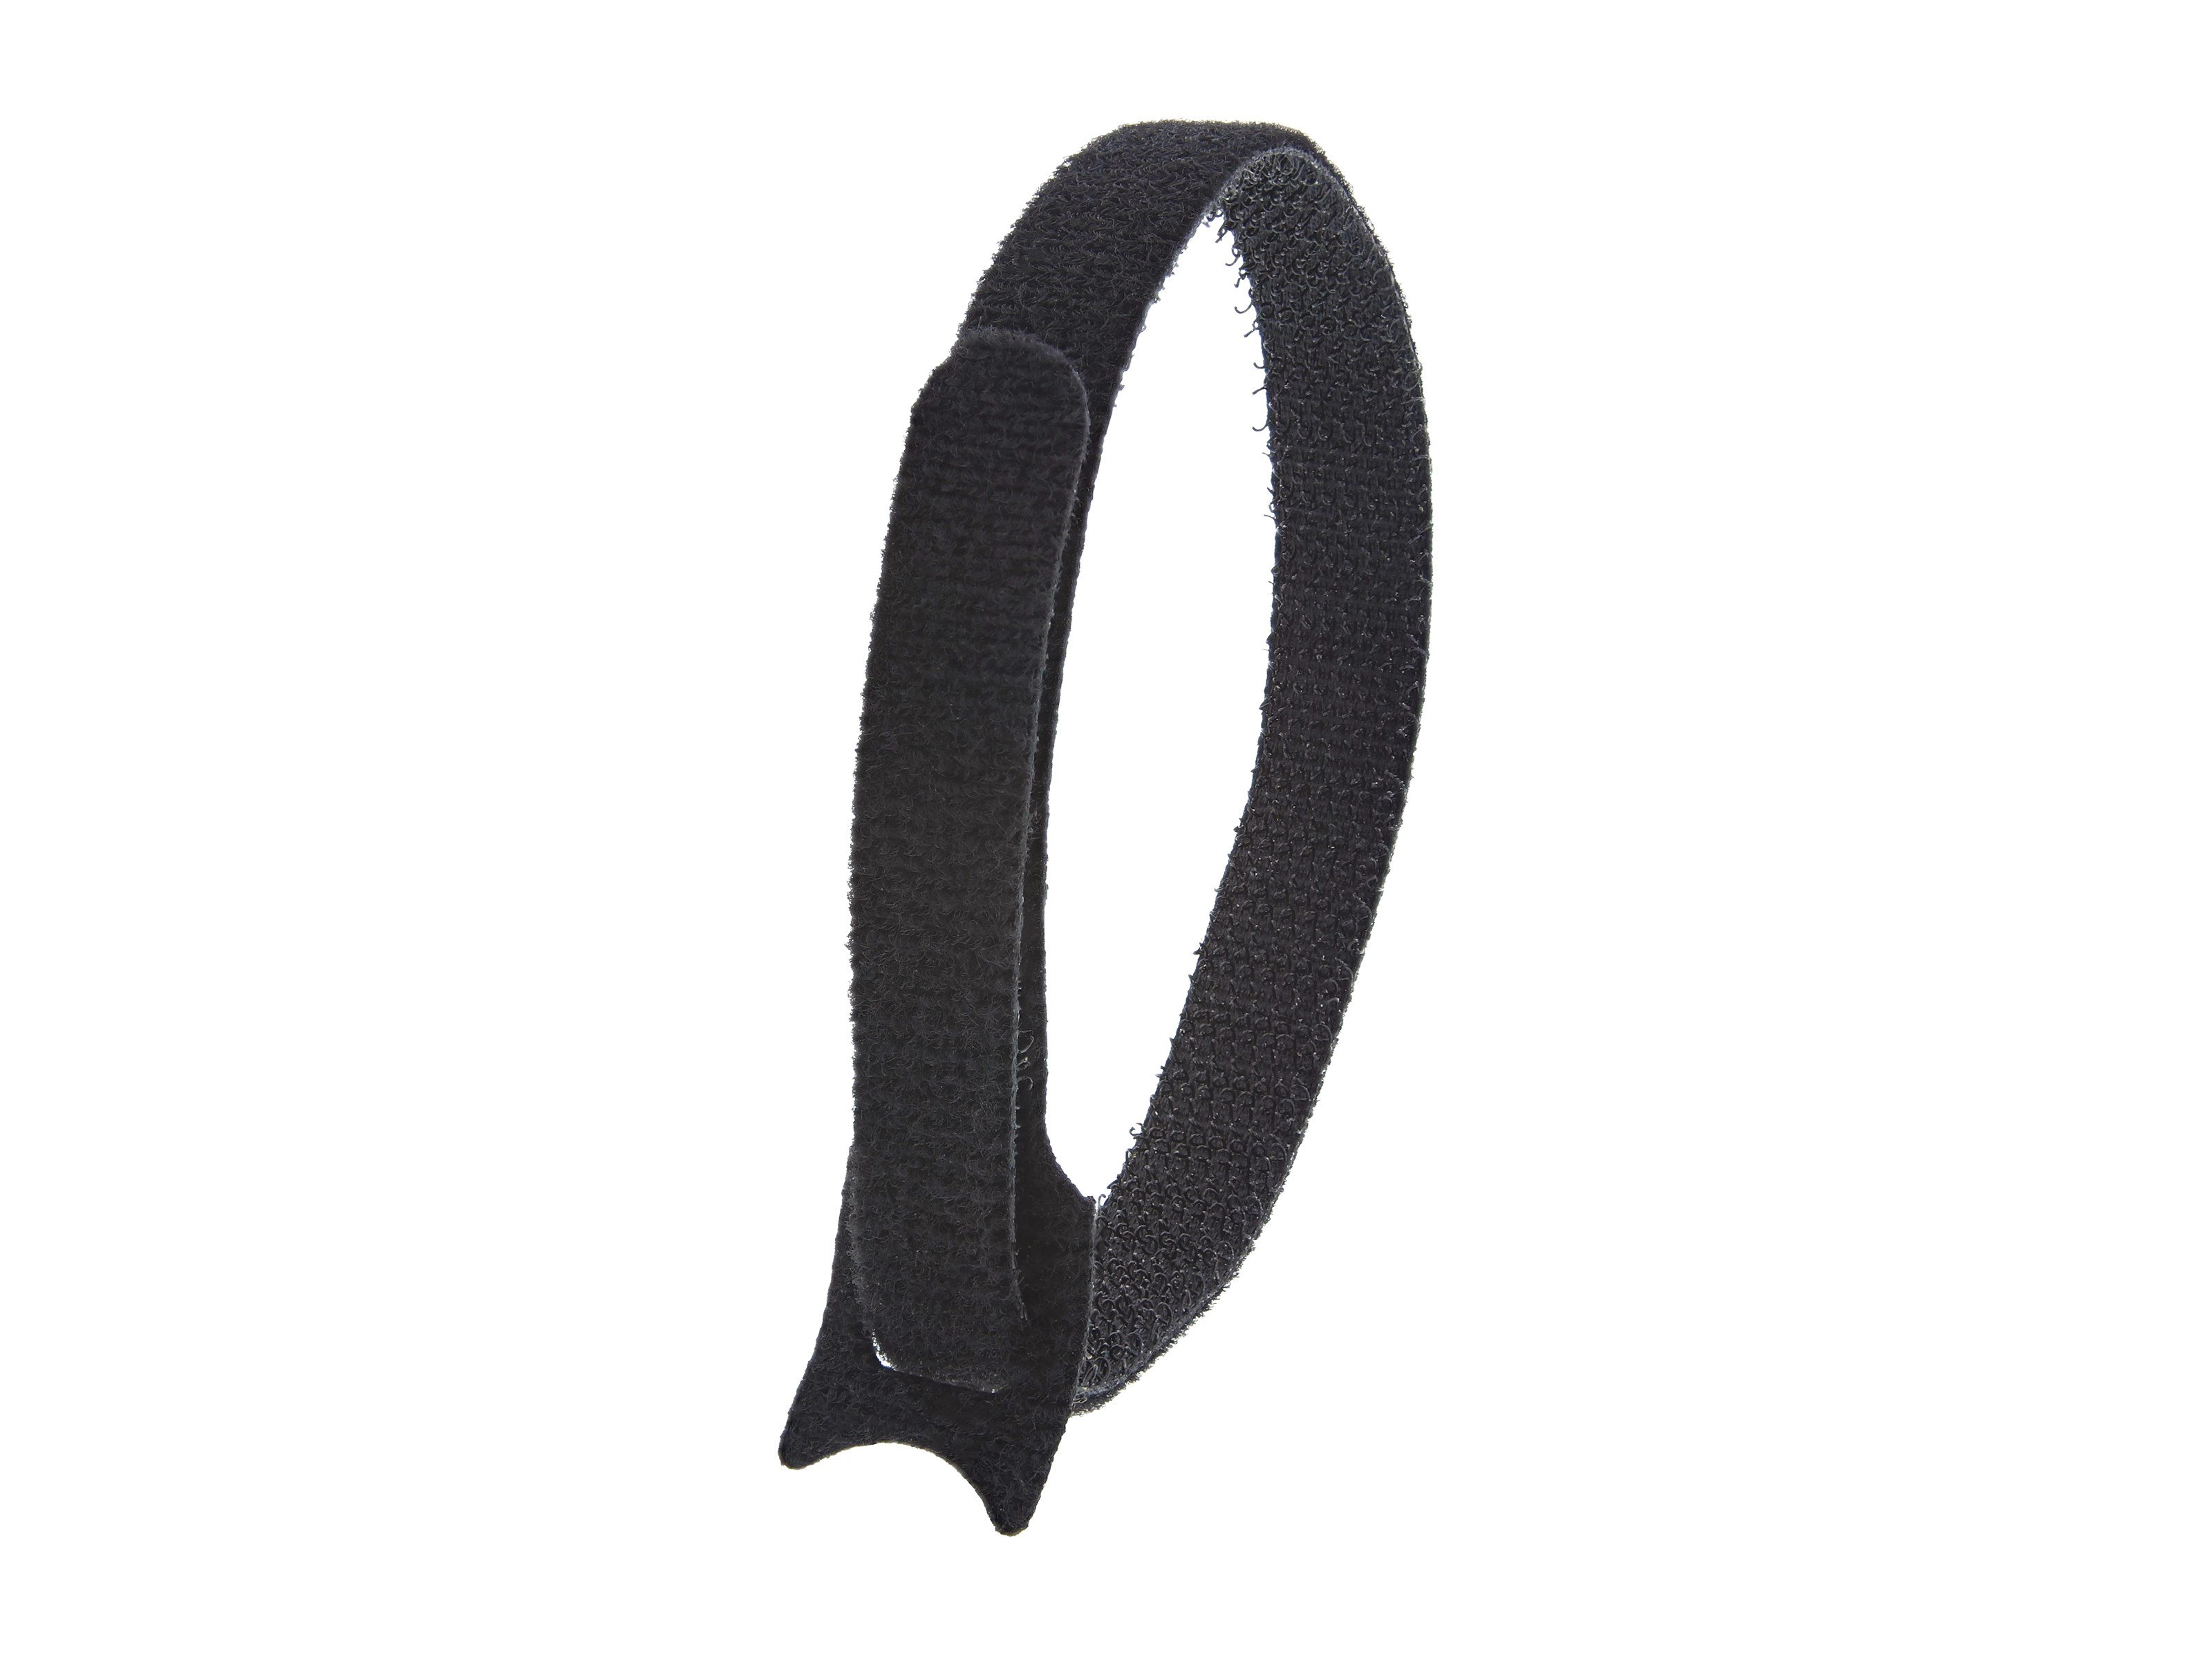 12 Pieces Reusable Cable Tie Straps - Hook And Loop Cable Ties For